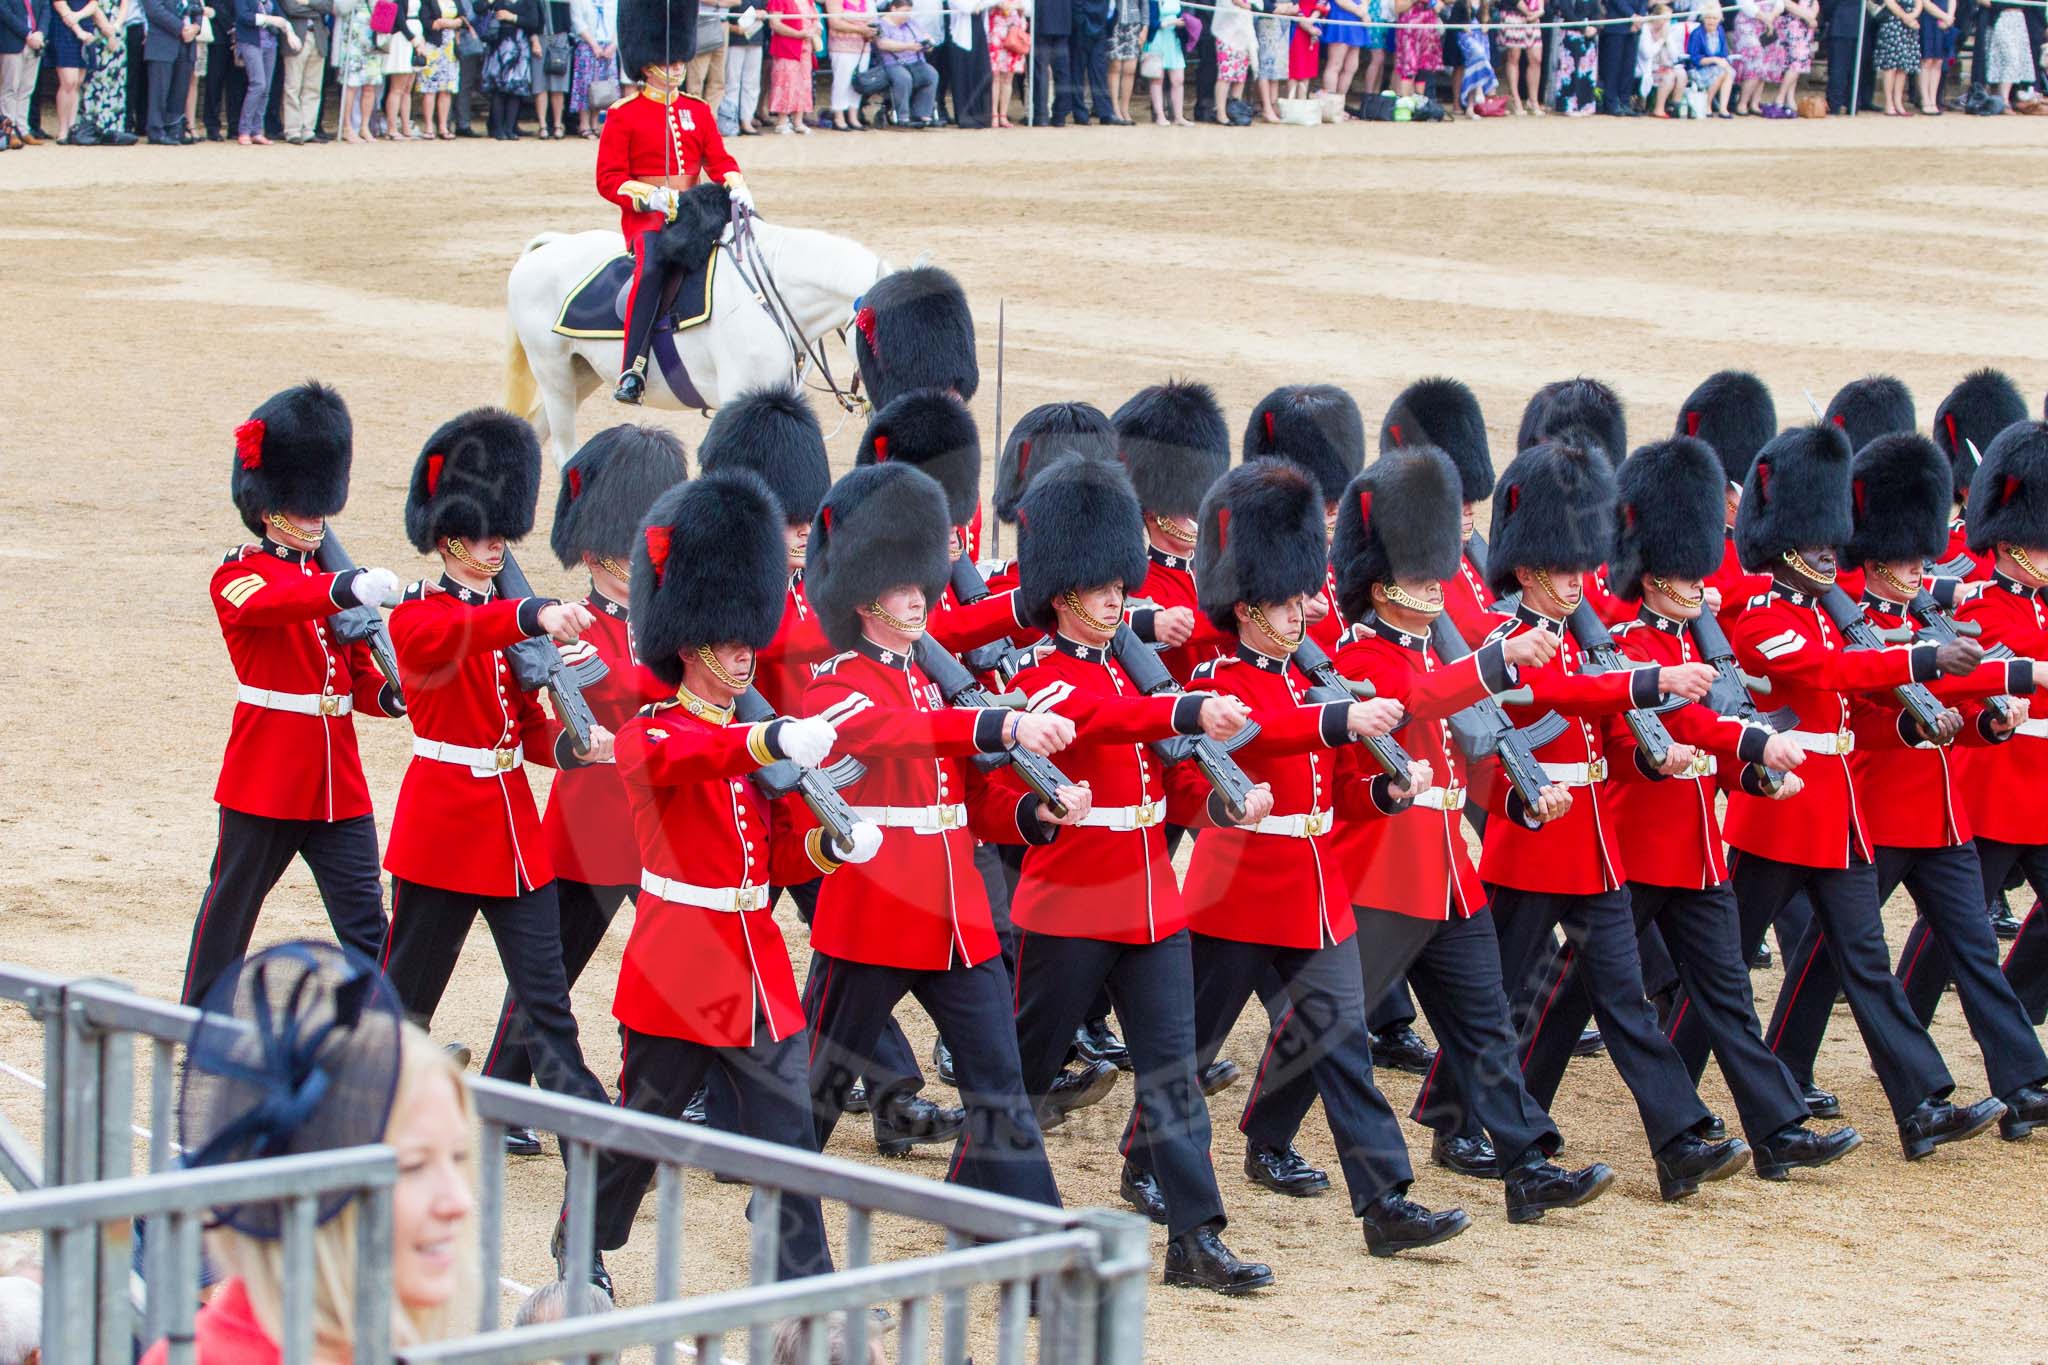 Trooping the Colour 2014.
Horse Guards Parade, Westminster,
London SW1A,

United Kingdom,
on 14 June 2014 at 11:47, image #694